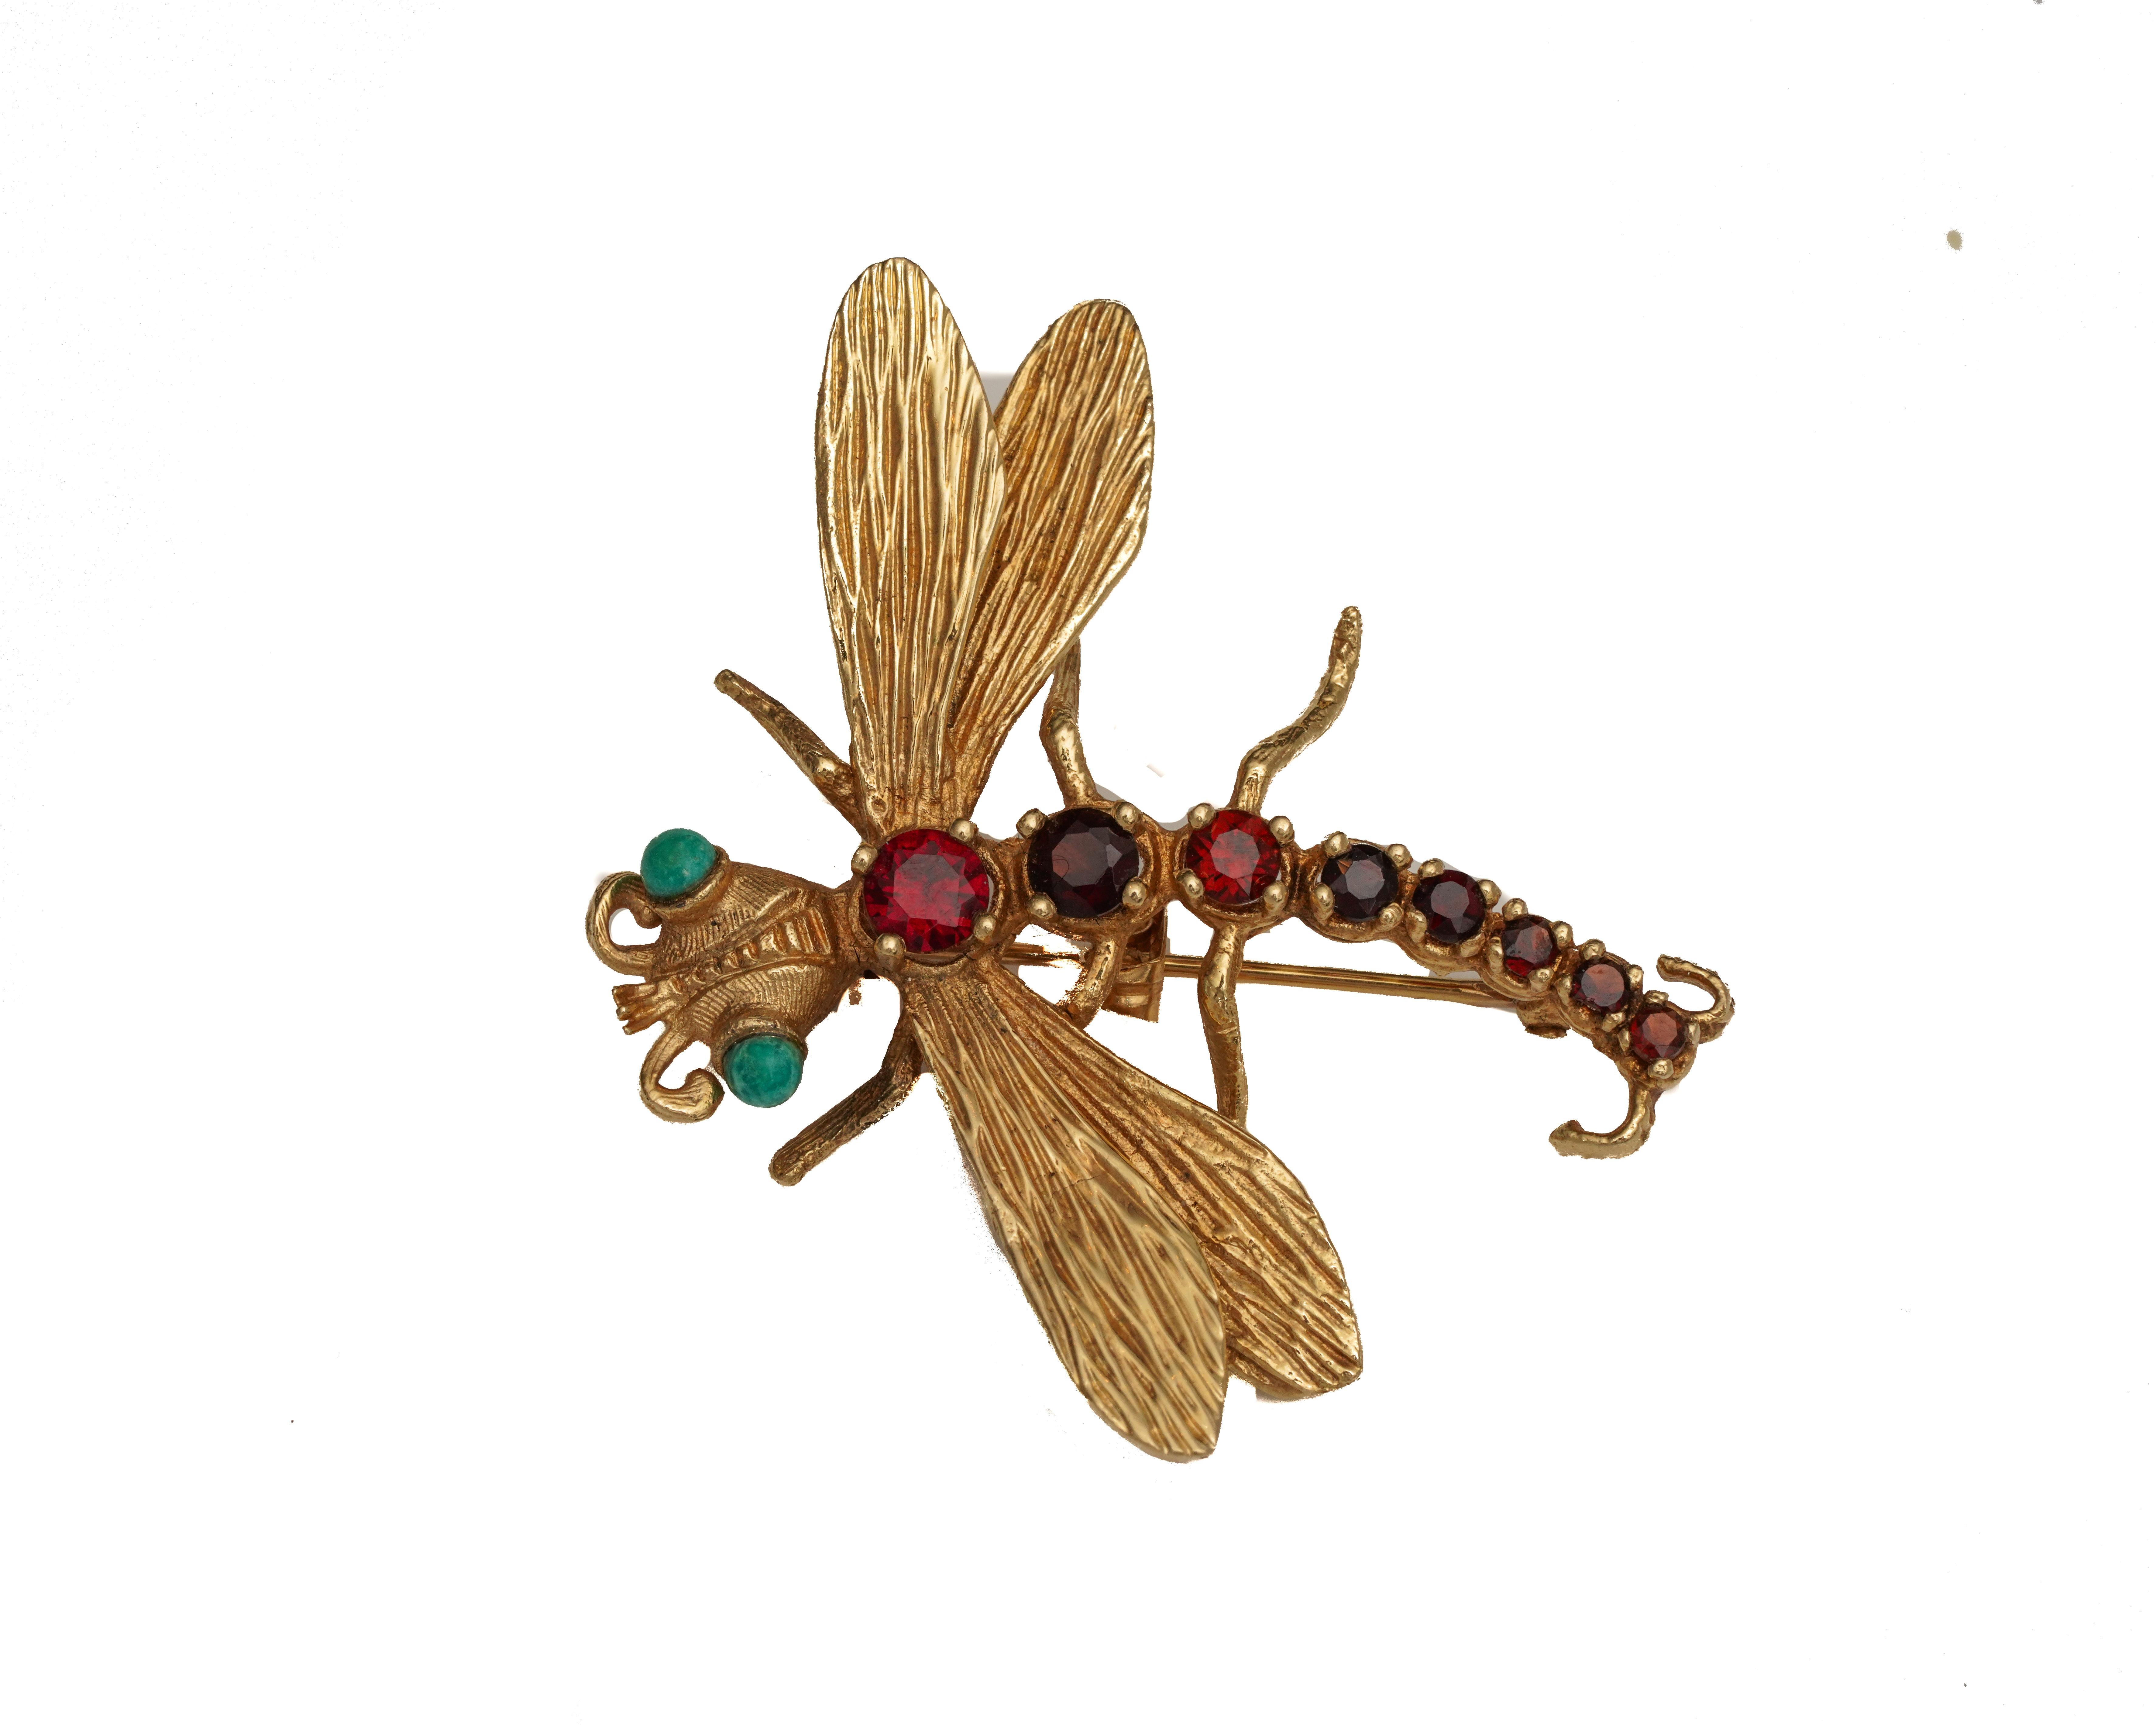 Item Details:
Metal type: 14 Karat Yellow Gold
Weight: 7.2 grams 
Measures: 2 inch length x 2 inch width

Features: 
Tail - made of 8 Garnet Stones graduating down in size, all round stones
Eyes: 2 Turquoise stones
Wings: Hand etched textured high